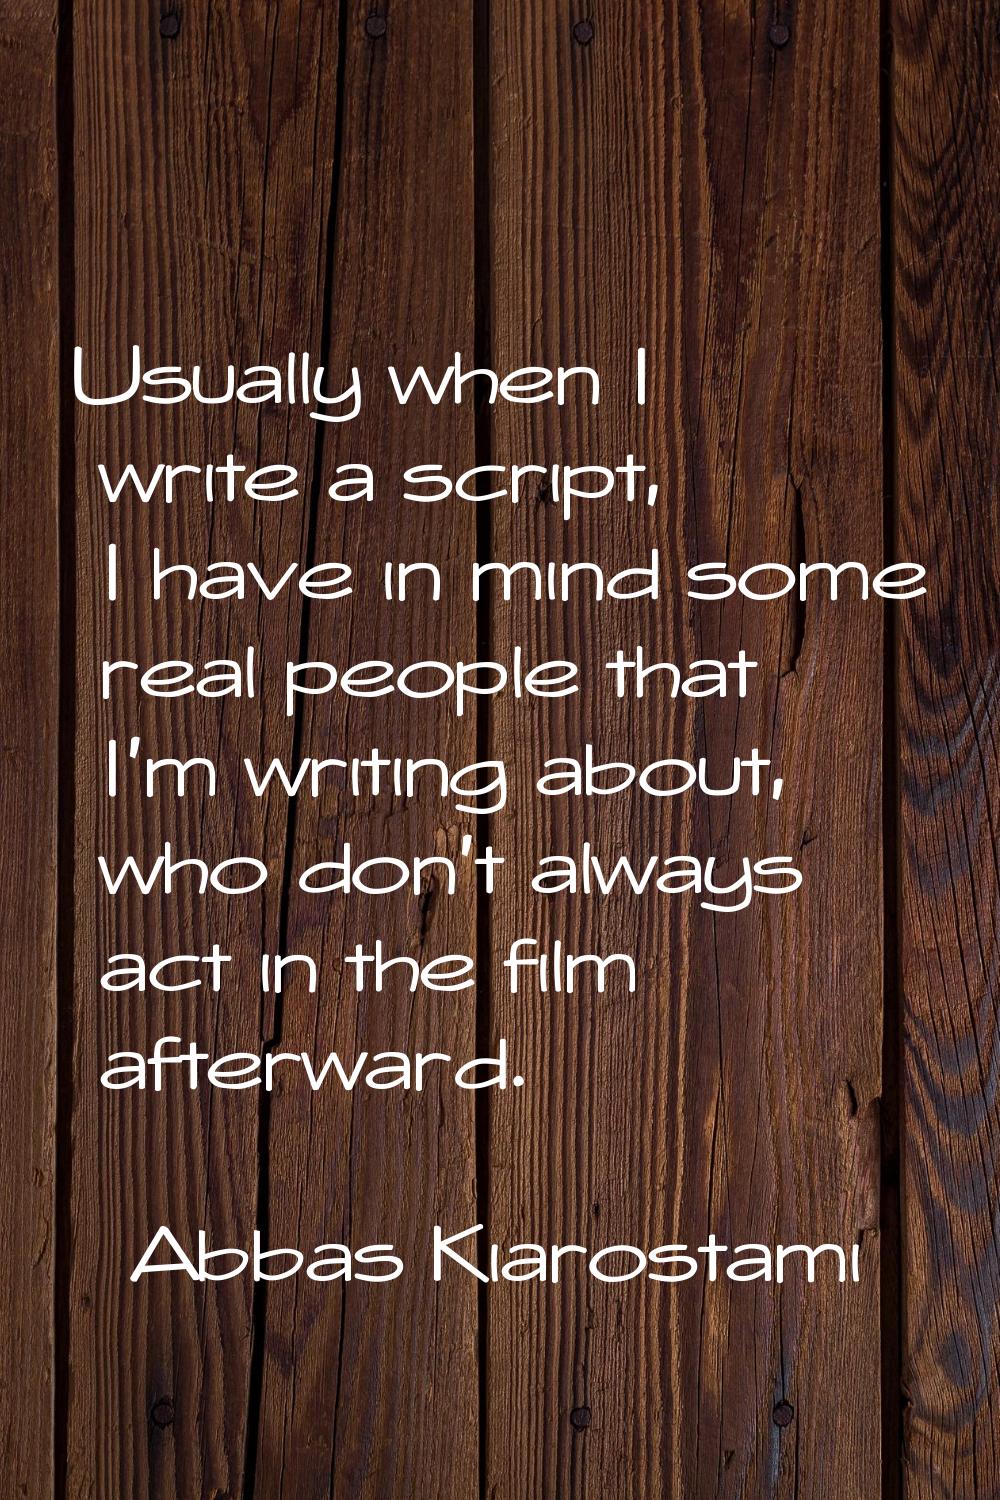 Usually when I write a script, I have in mind some real people that I'm writing about, who don't al